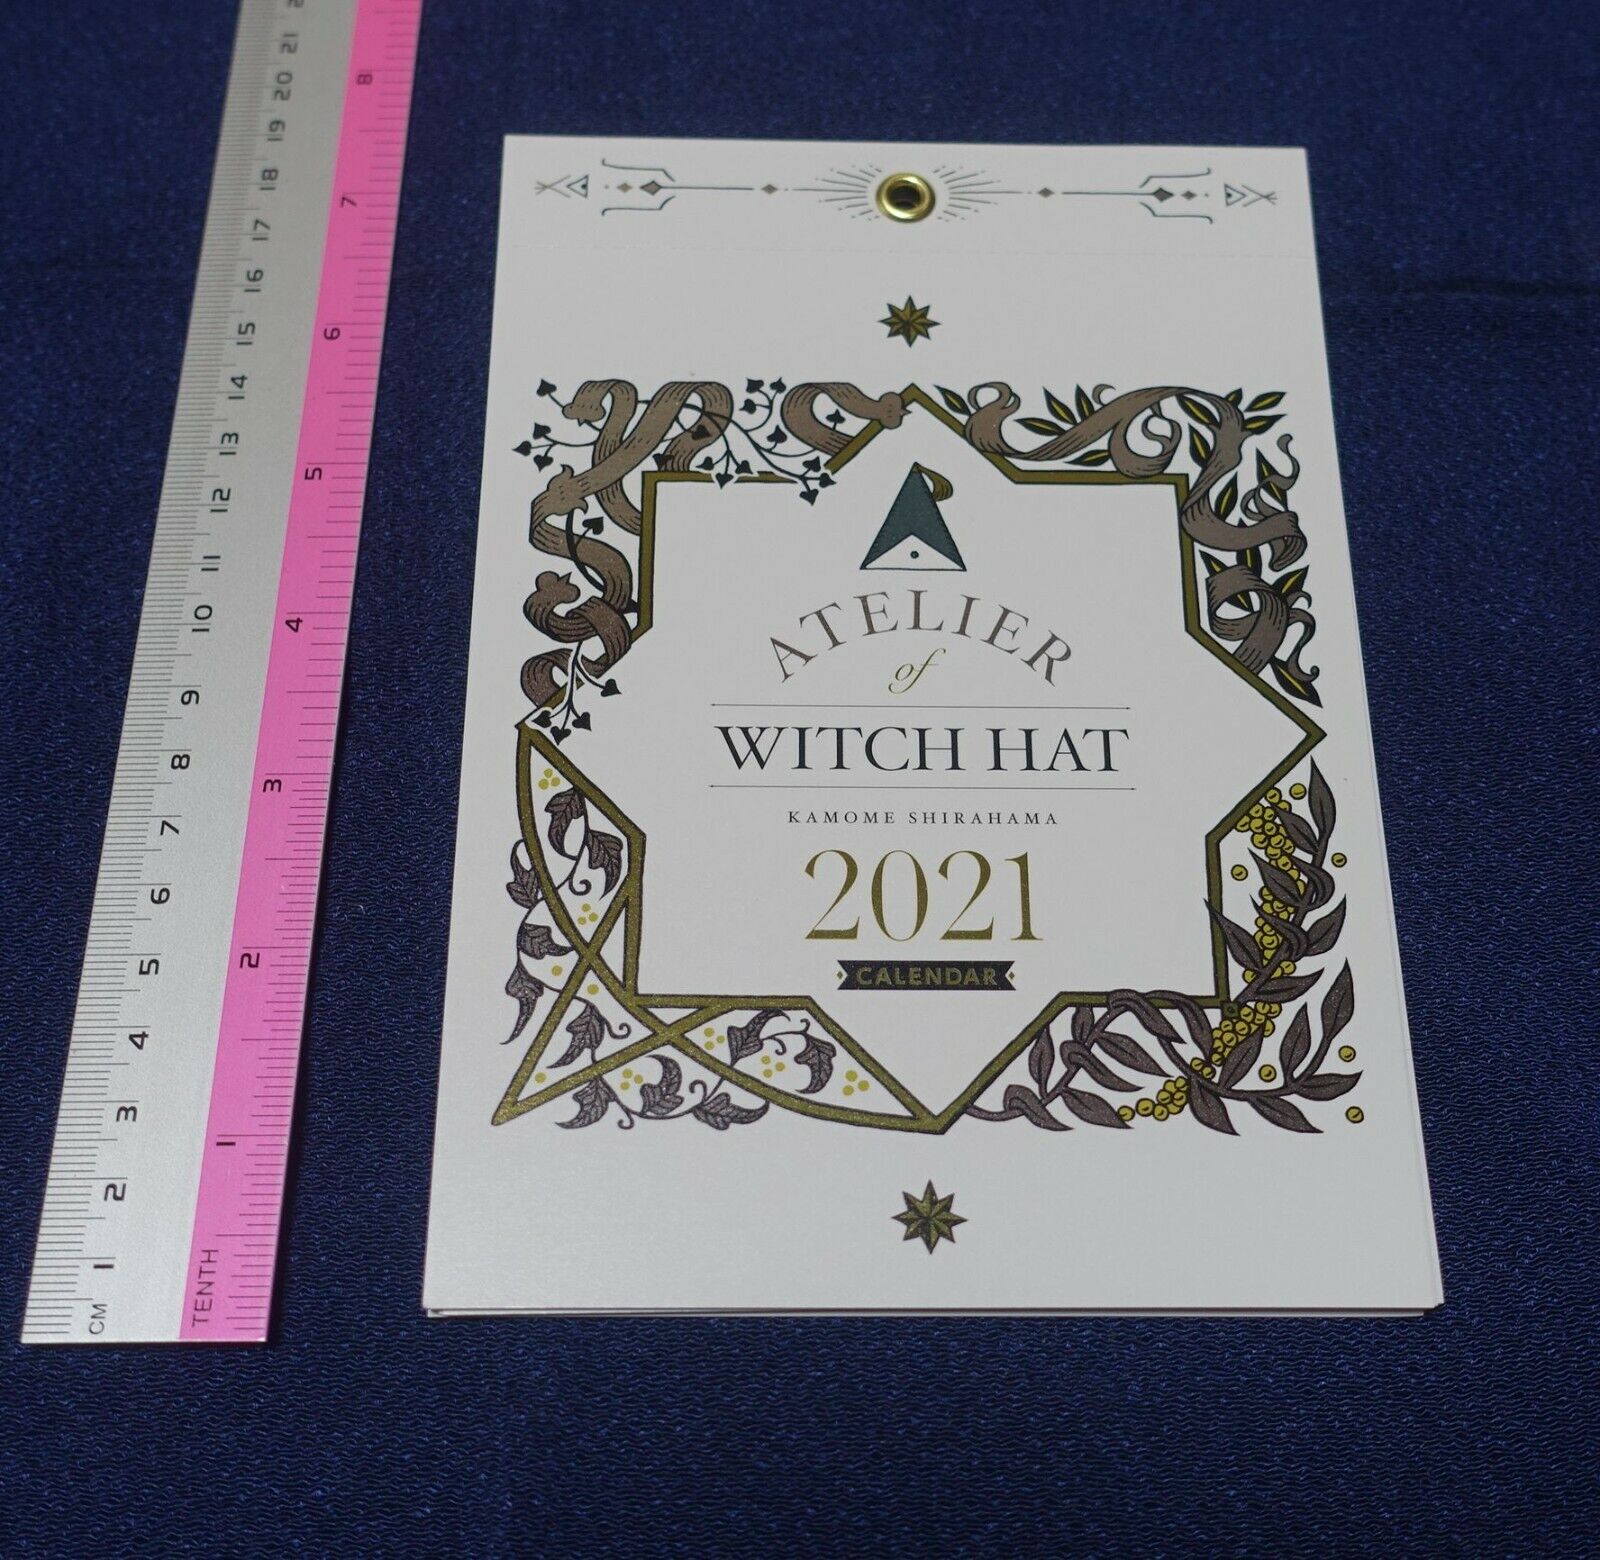 Kamome Shirahama ATELIER OF WITCH HAT 2021 CALENDAR 